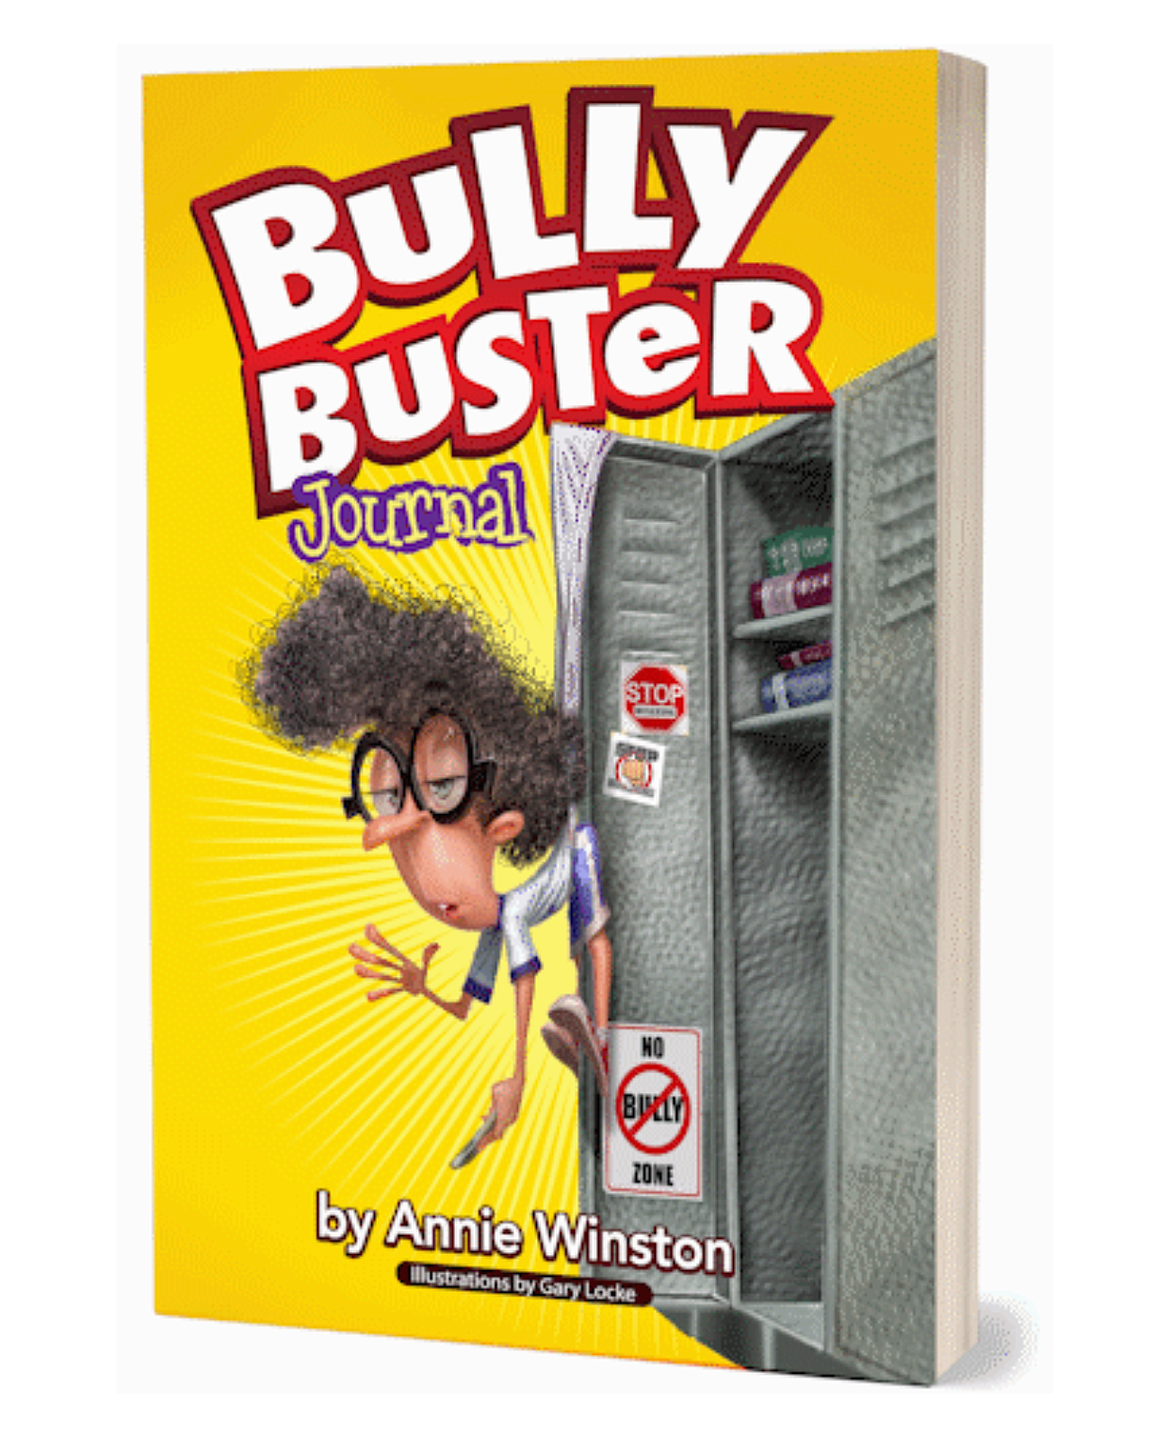 "Bully Buster Journal" is a story about how faith, wisdom and love can put an end to bully battles. It was recently released by Coeur d'Alene children's author Annie Winston, who will be signing copies on Saturday.